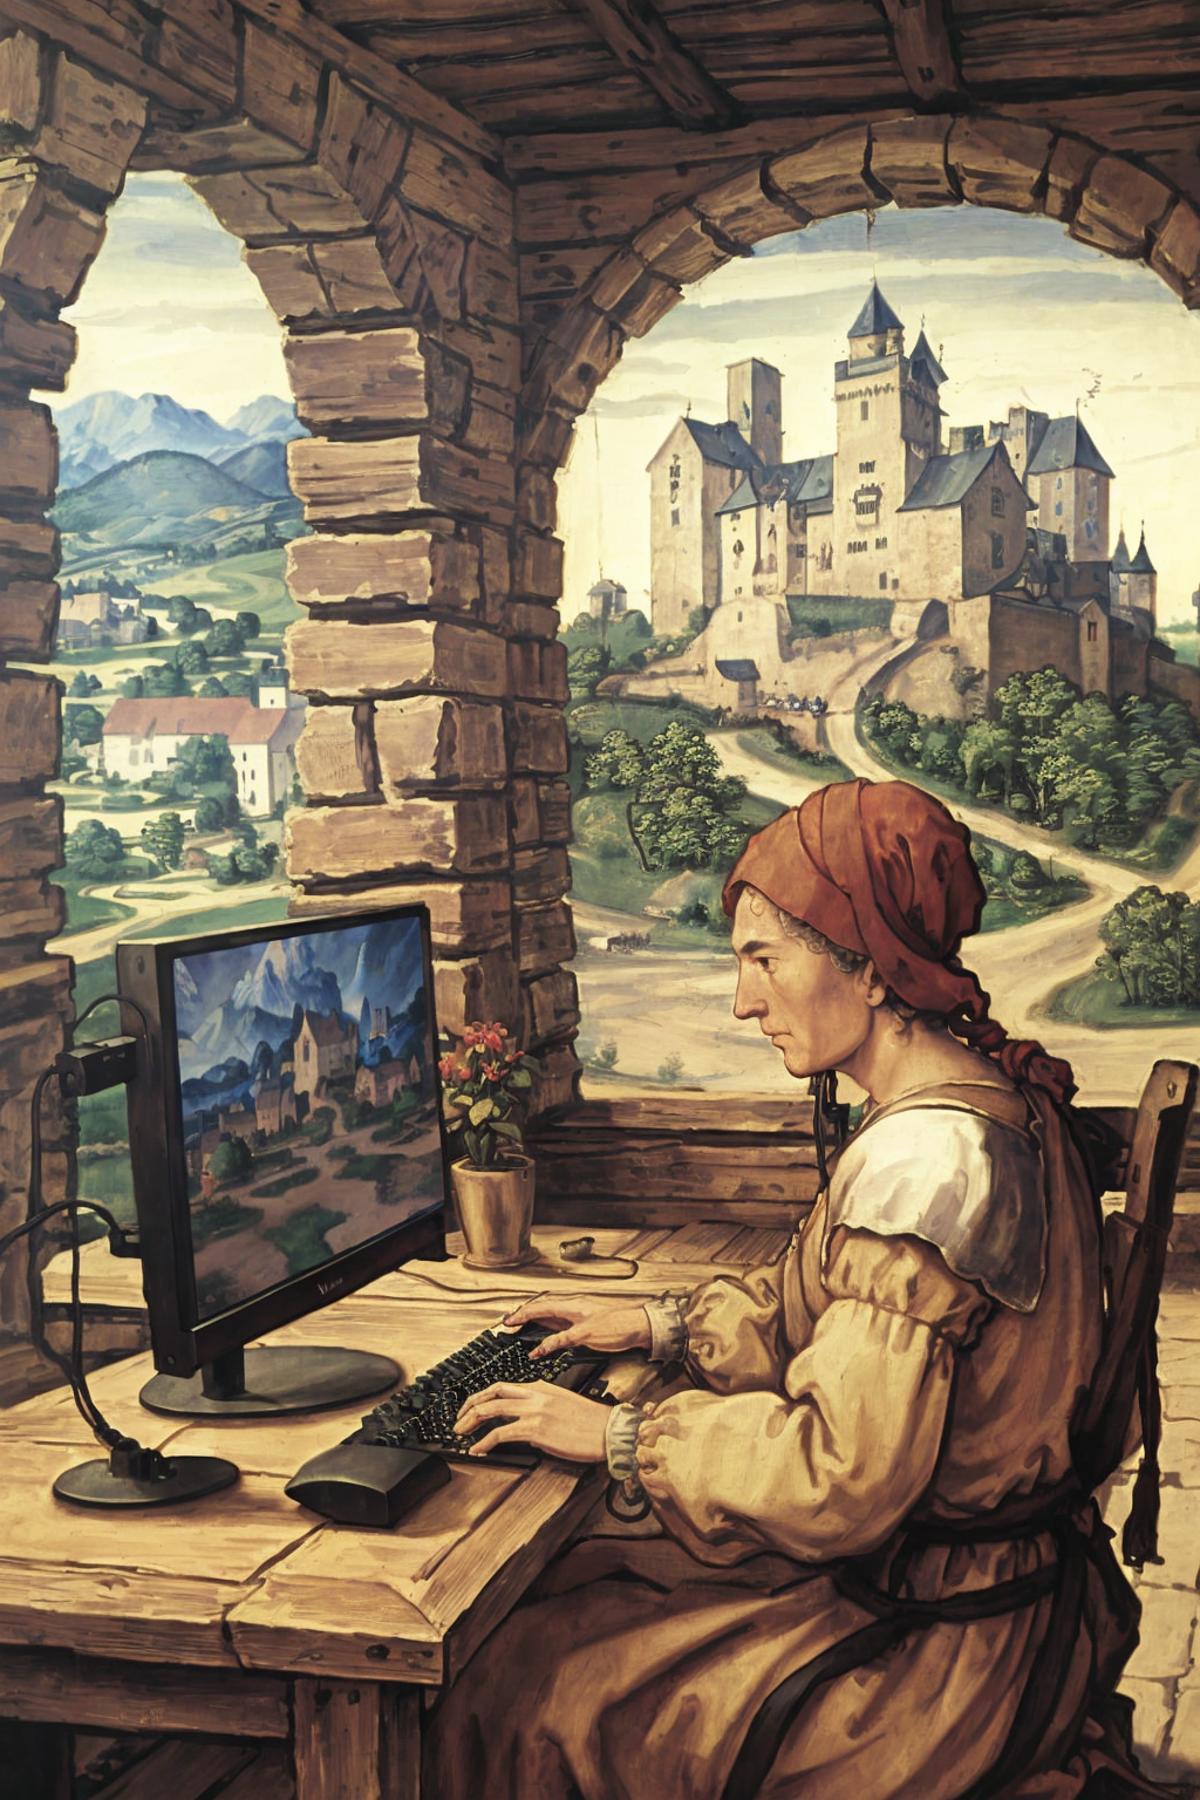 A woman in a red headband typing on a computer in a tower setting.